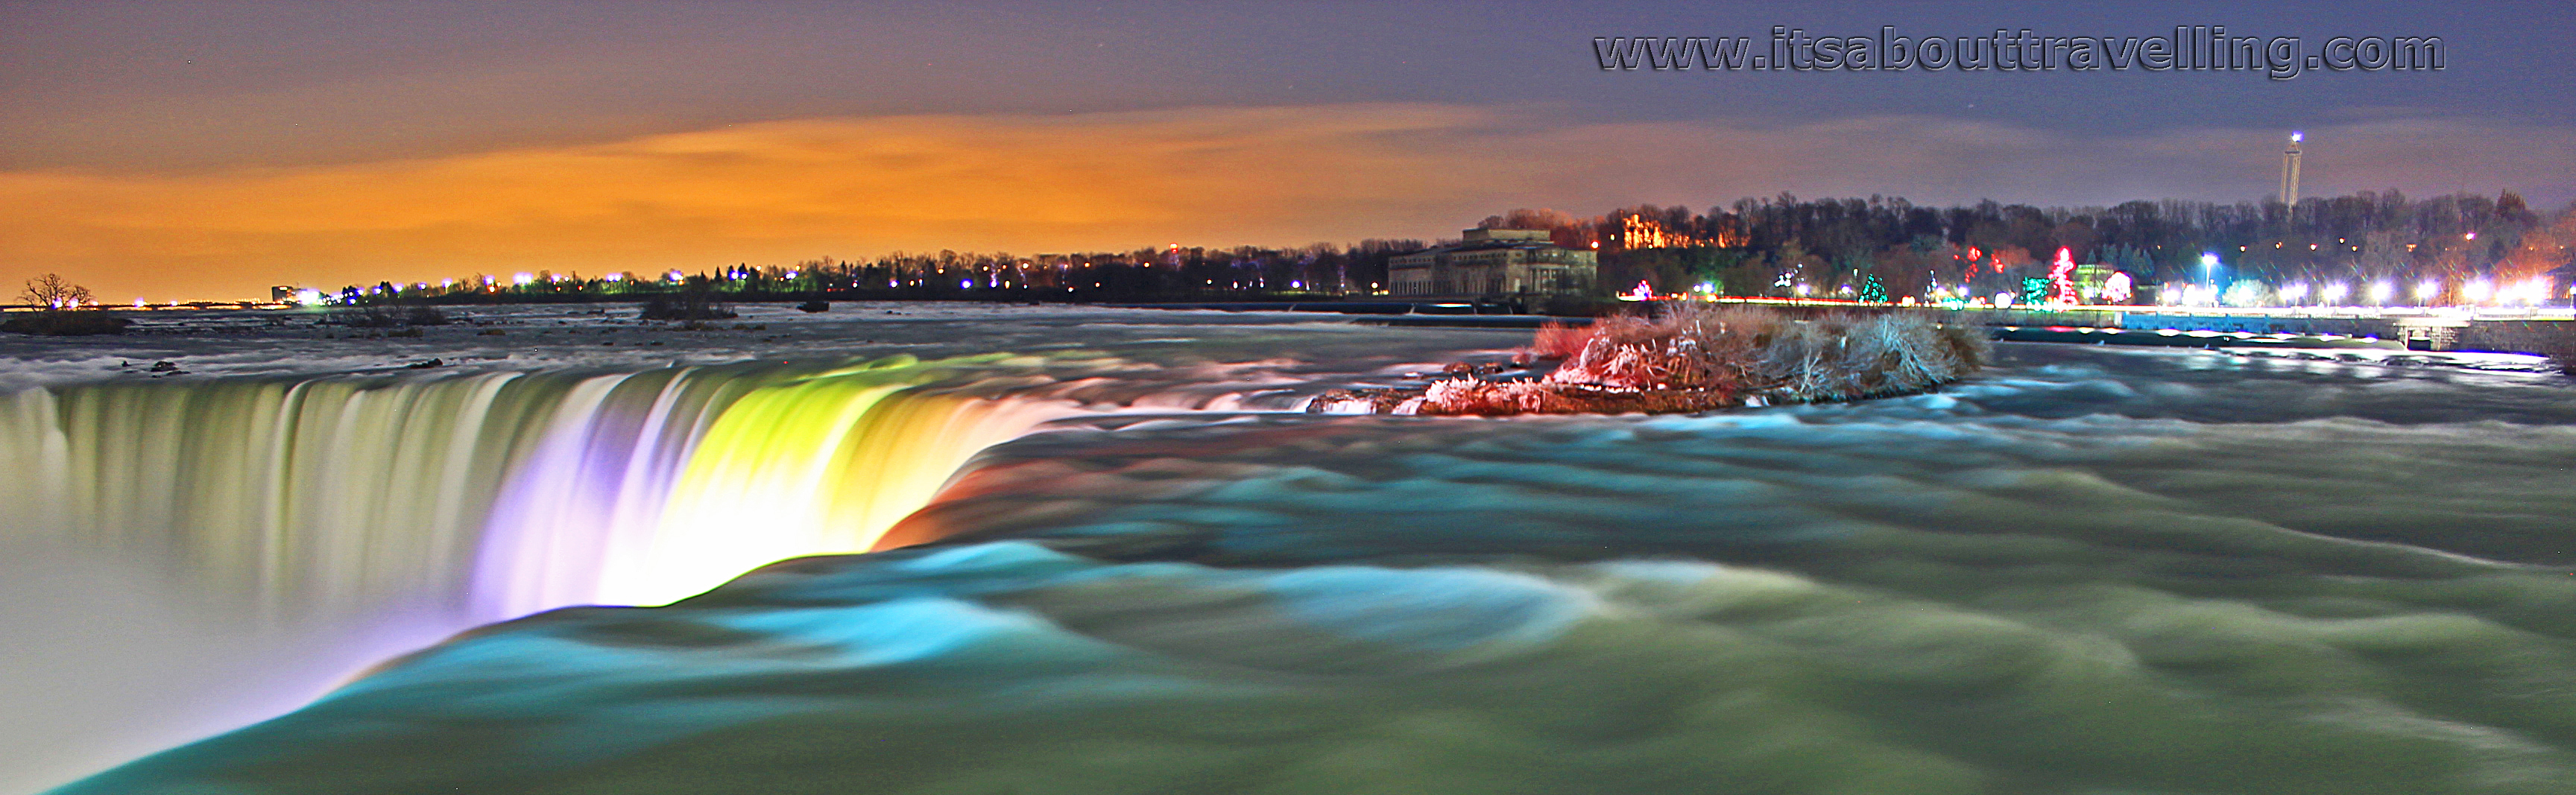 Horseshoe Falls At Night | Pic Of The Day